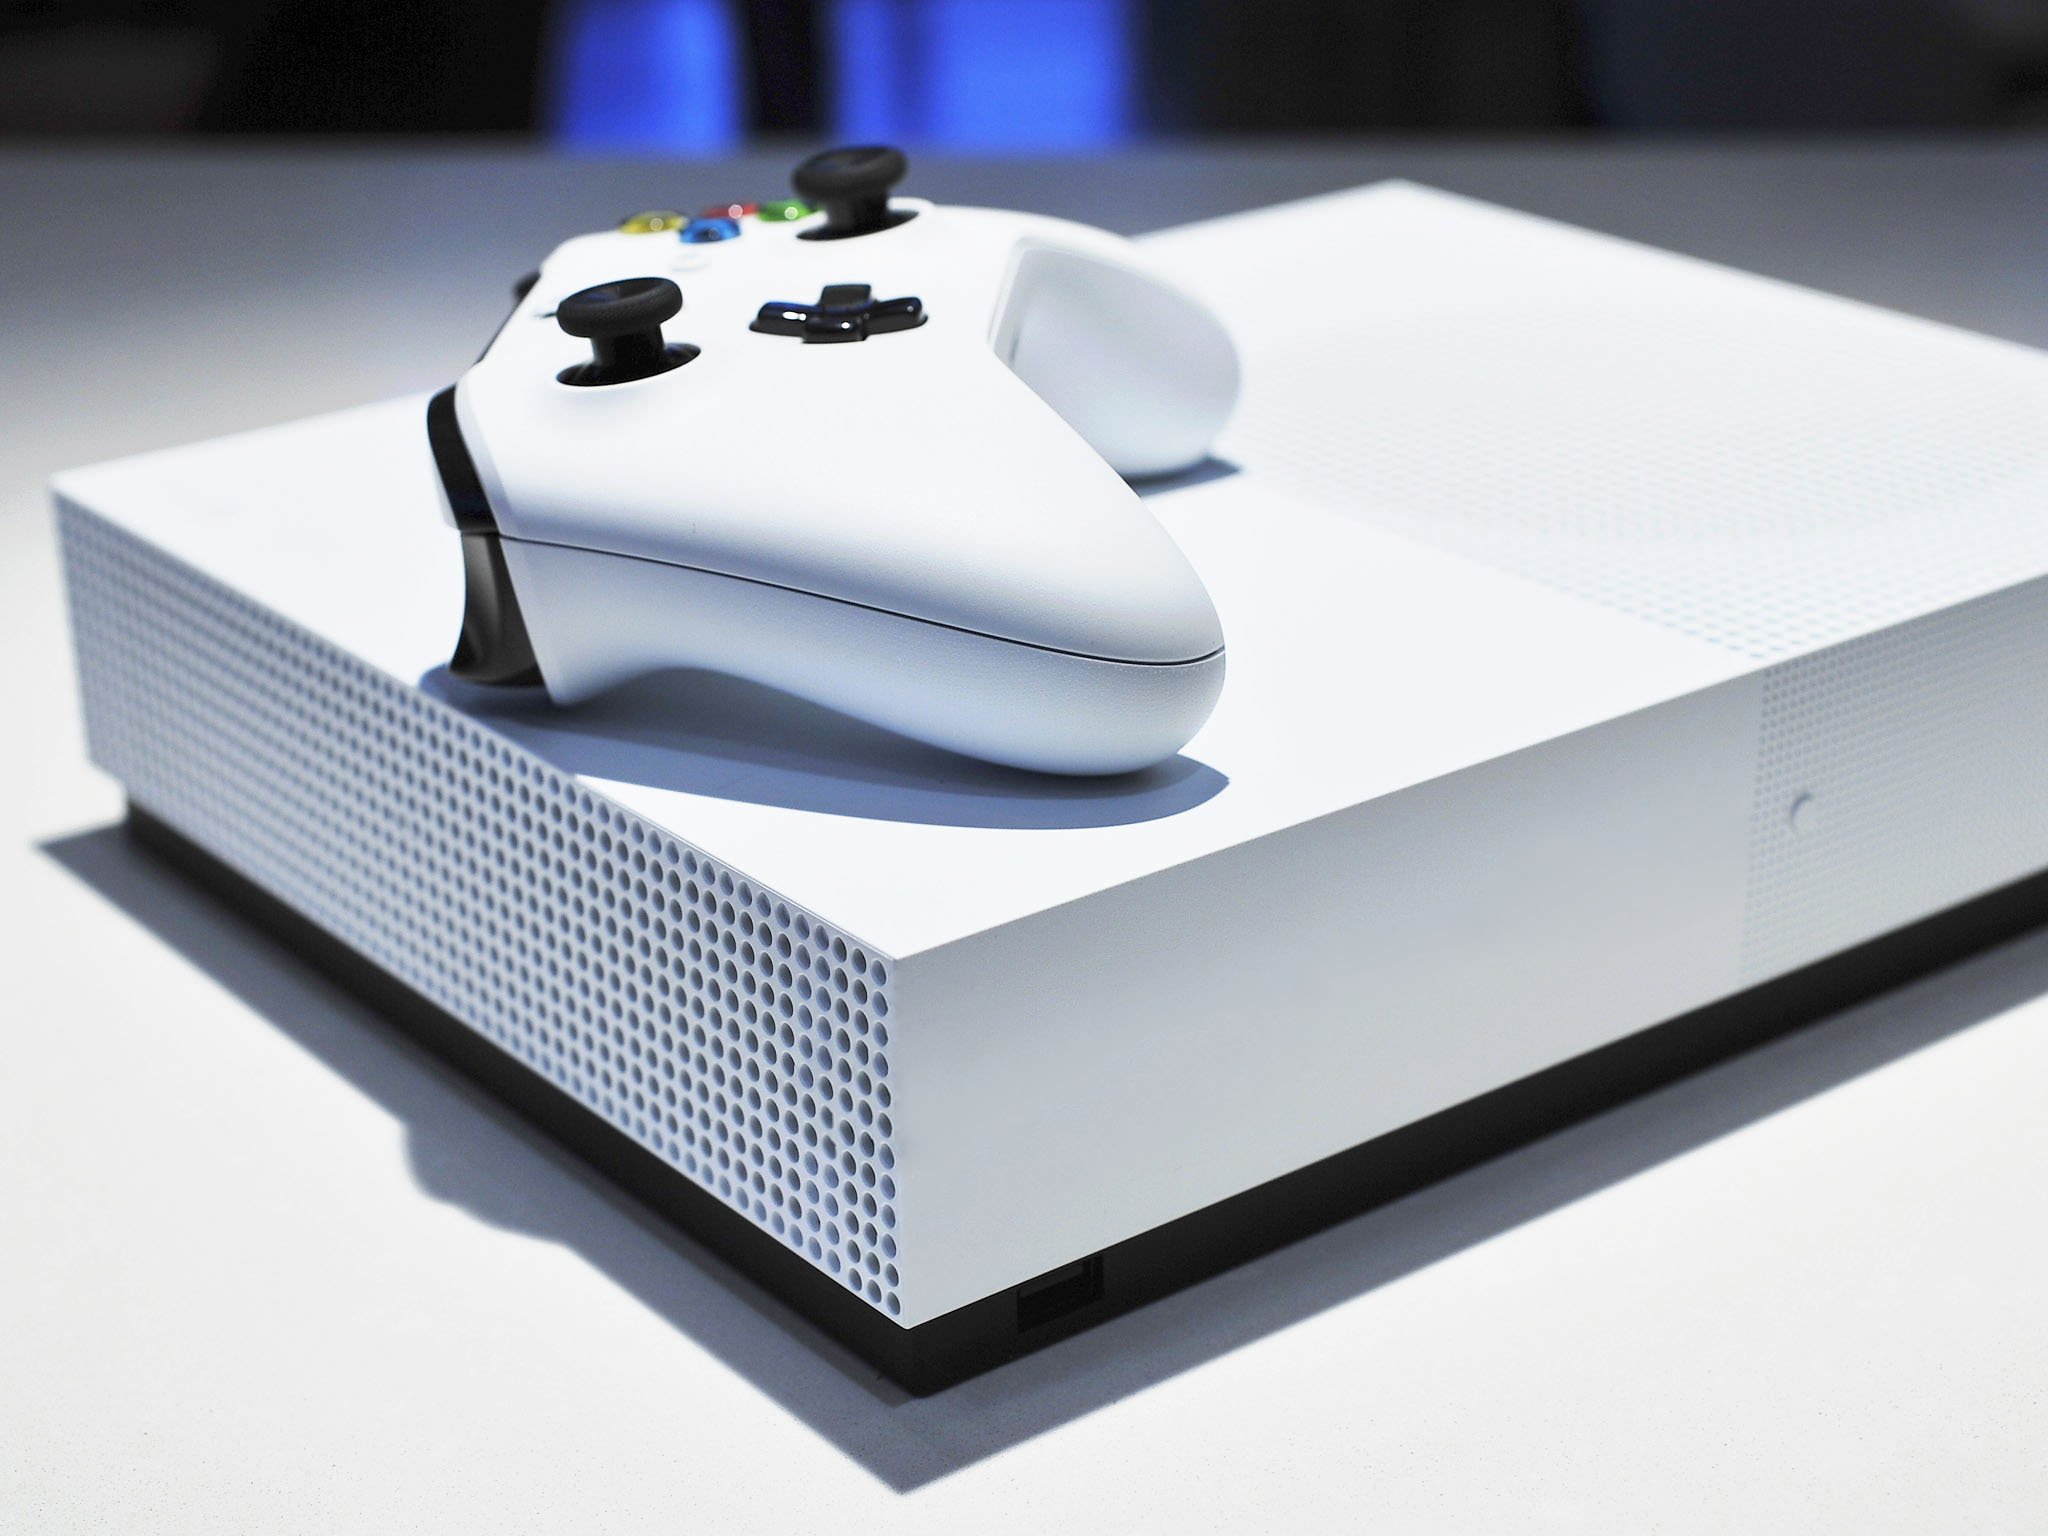 Xbox One S All-Digital Edition is out